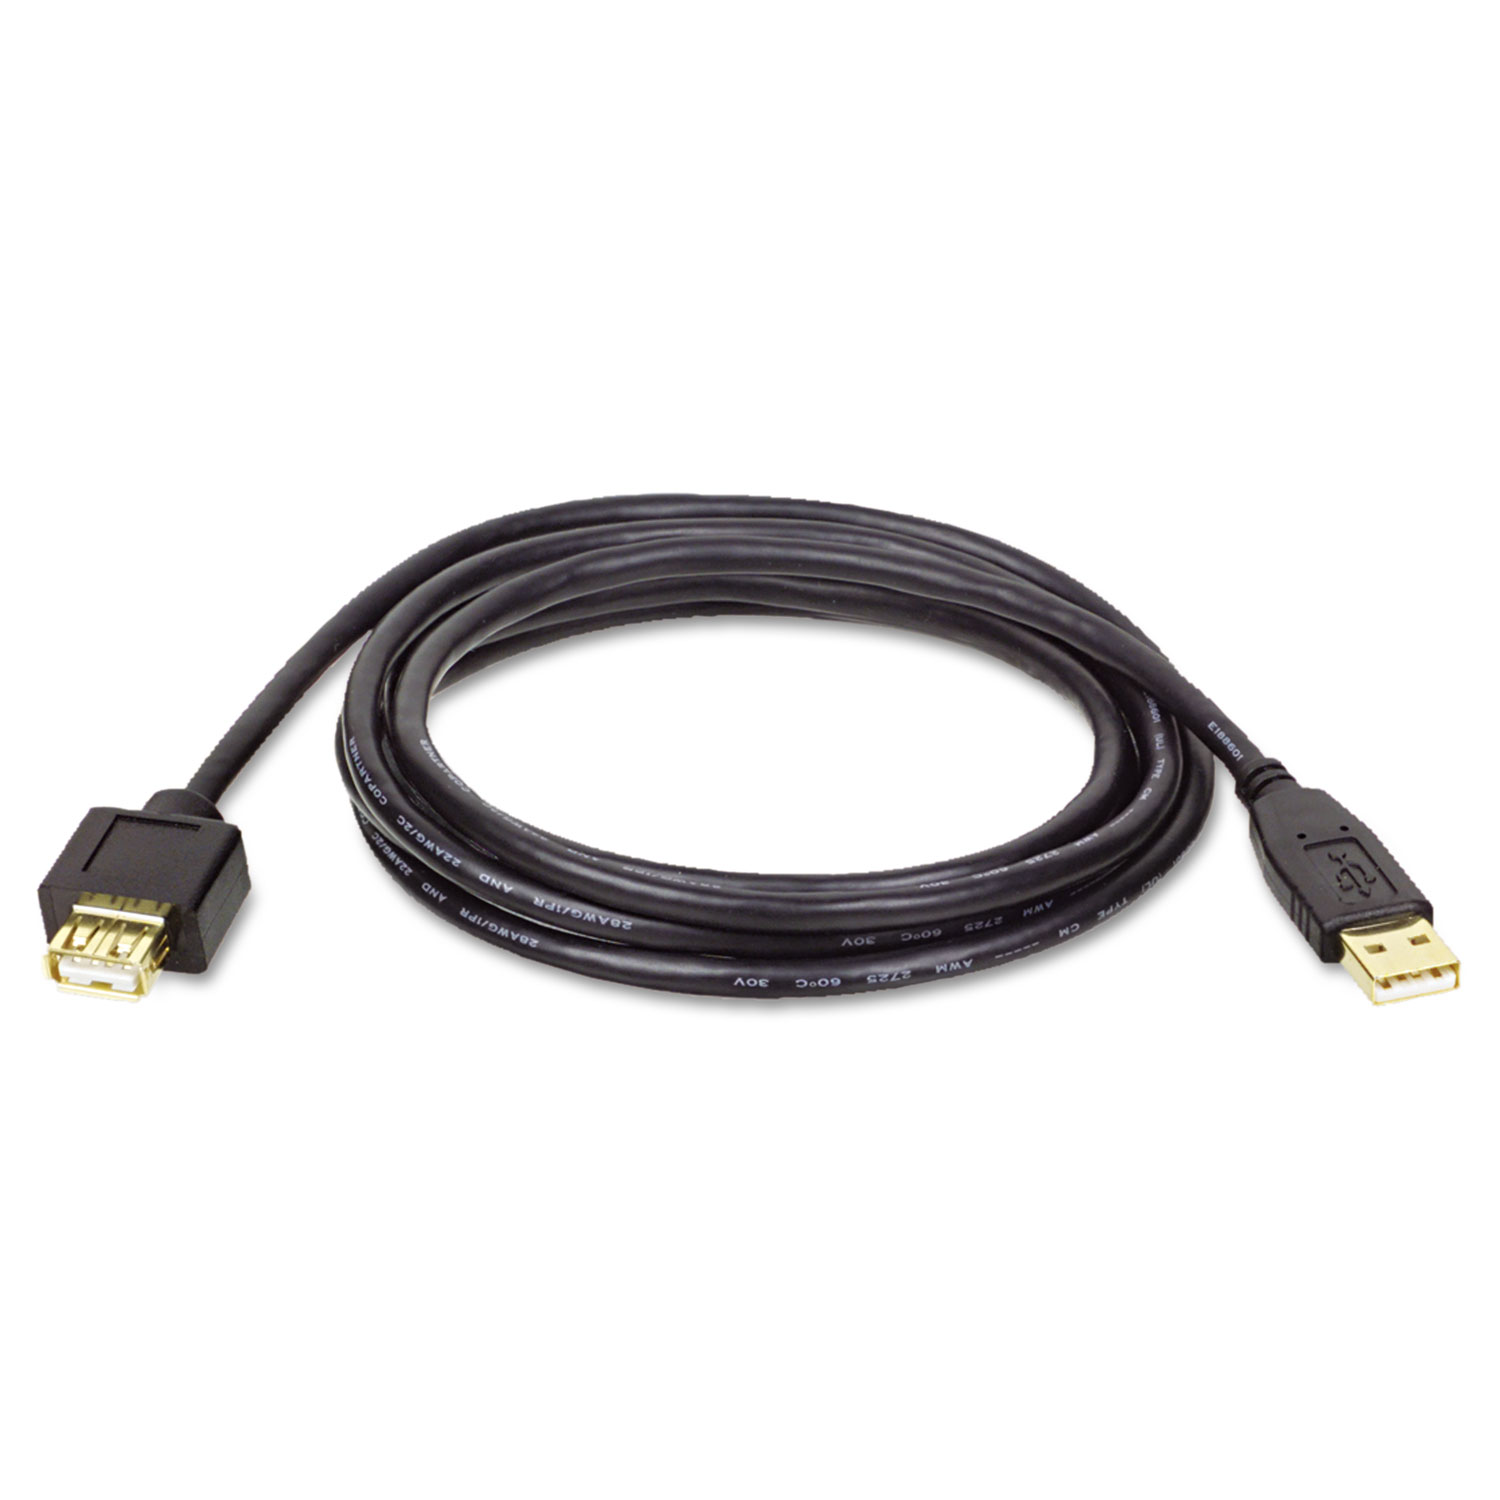 USB 2.0 A Extension Cable (M/F), 6 ft., Black